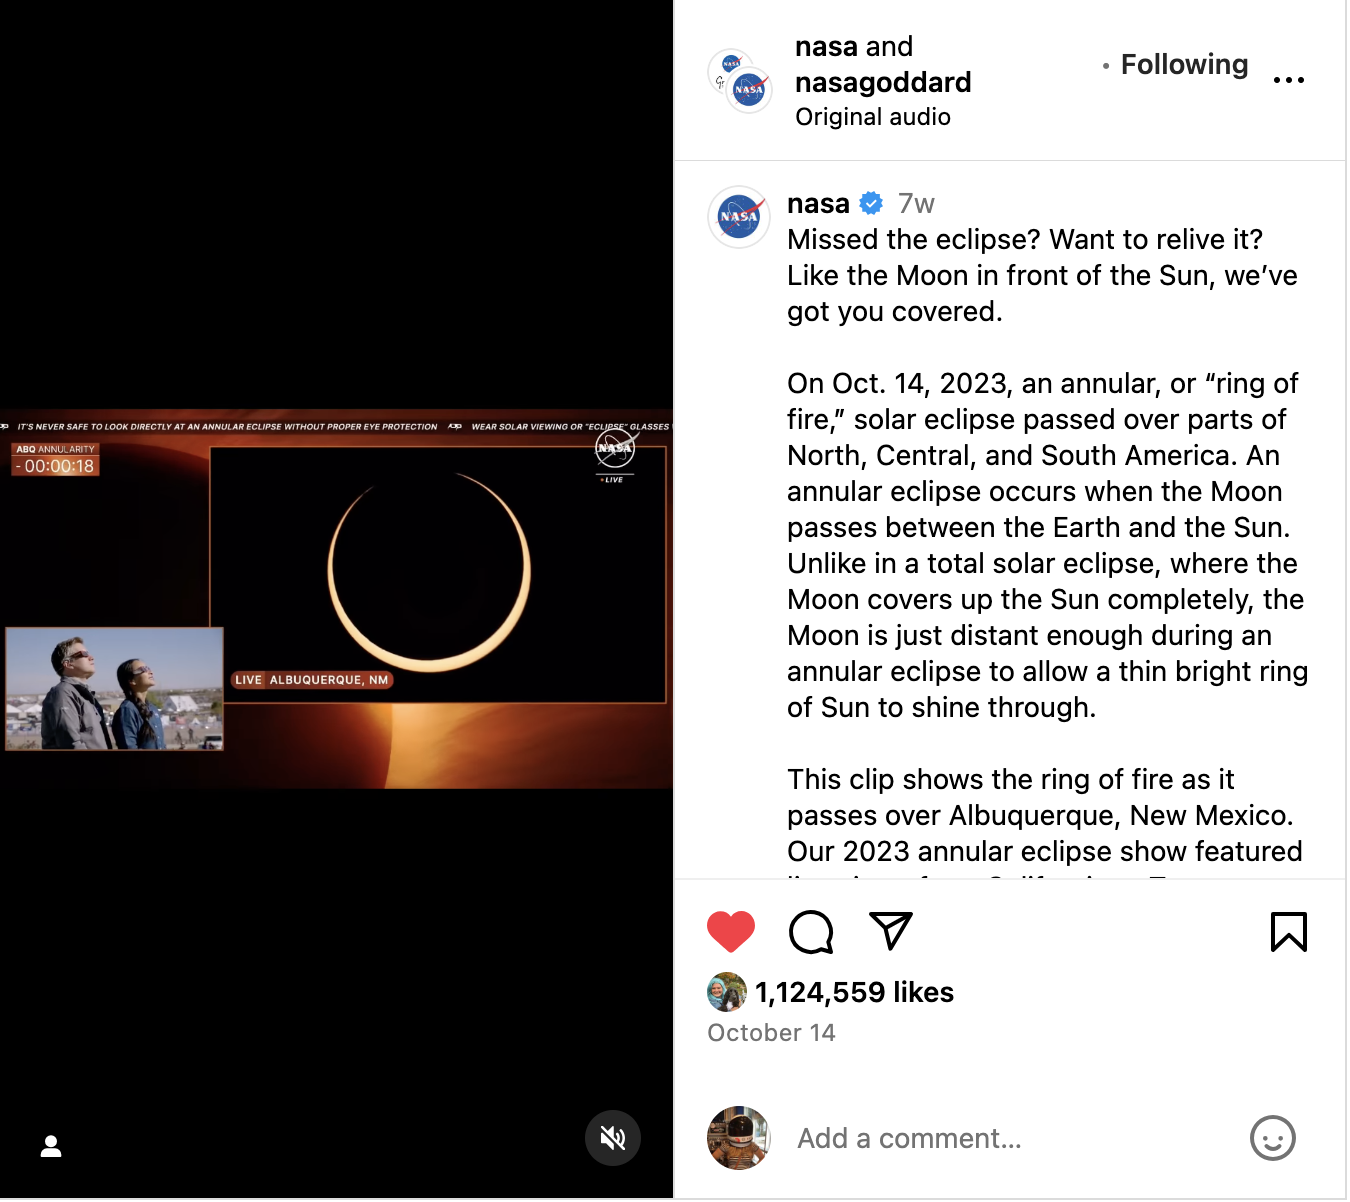 A screenshot of an Instagram post. On the left, two people look up at the sky wearing eclipse glasses. The annular eclipse is also shown. On the right, there is an Instagram caption